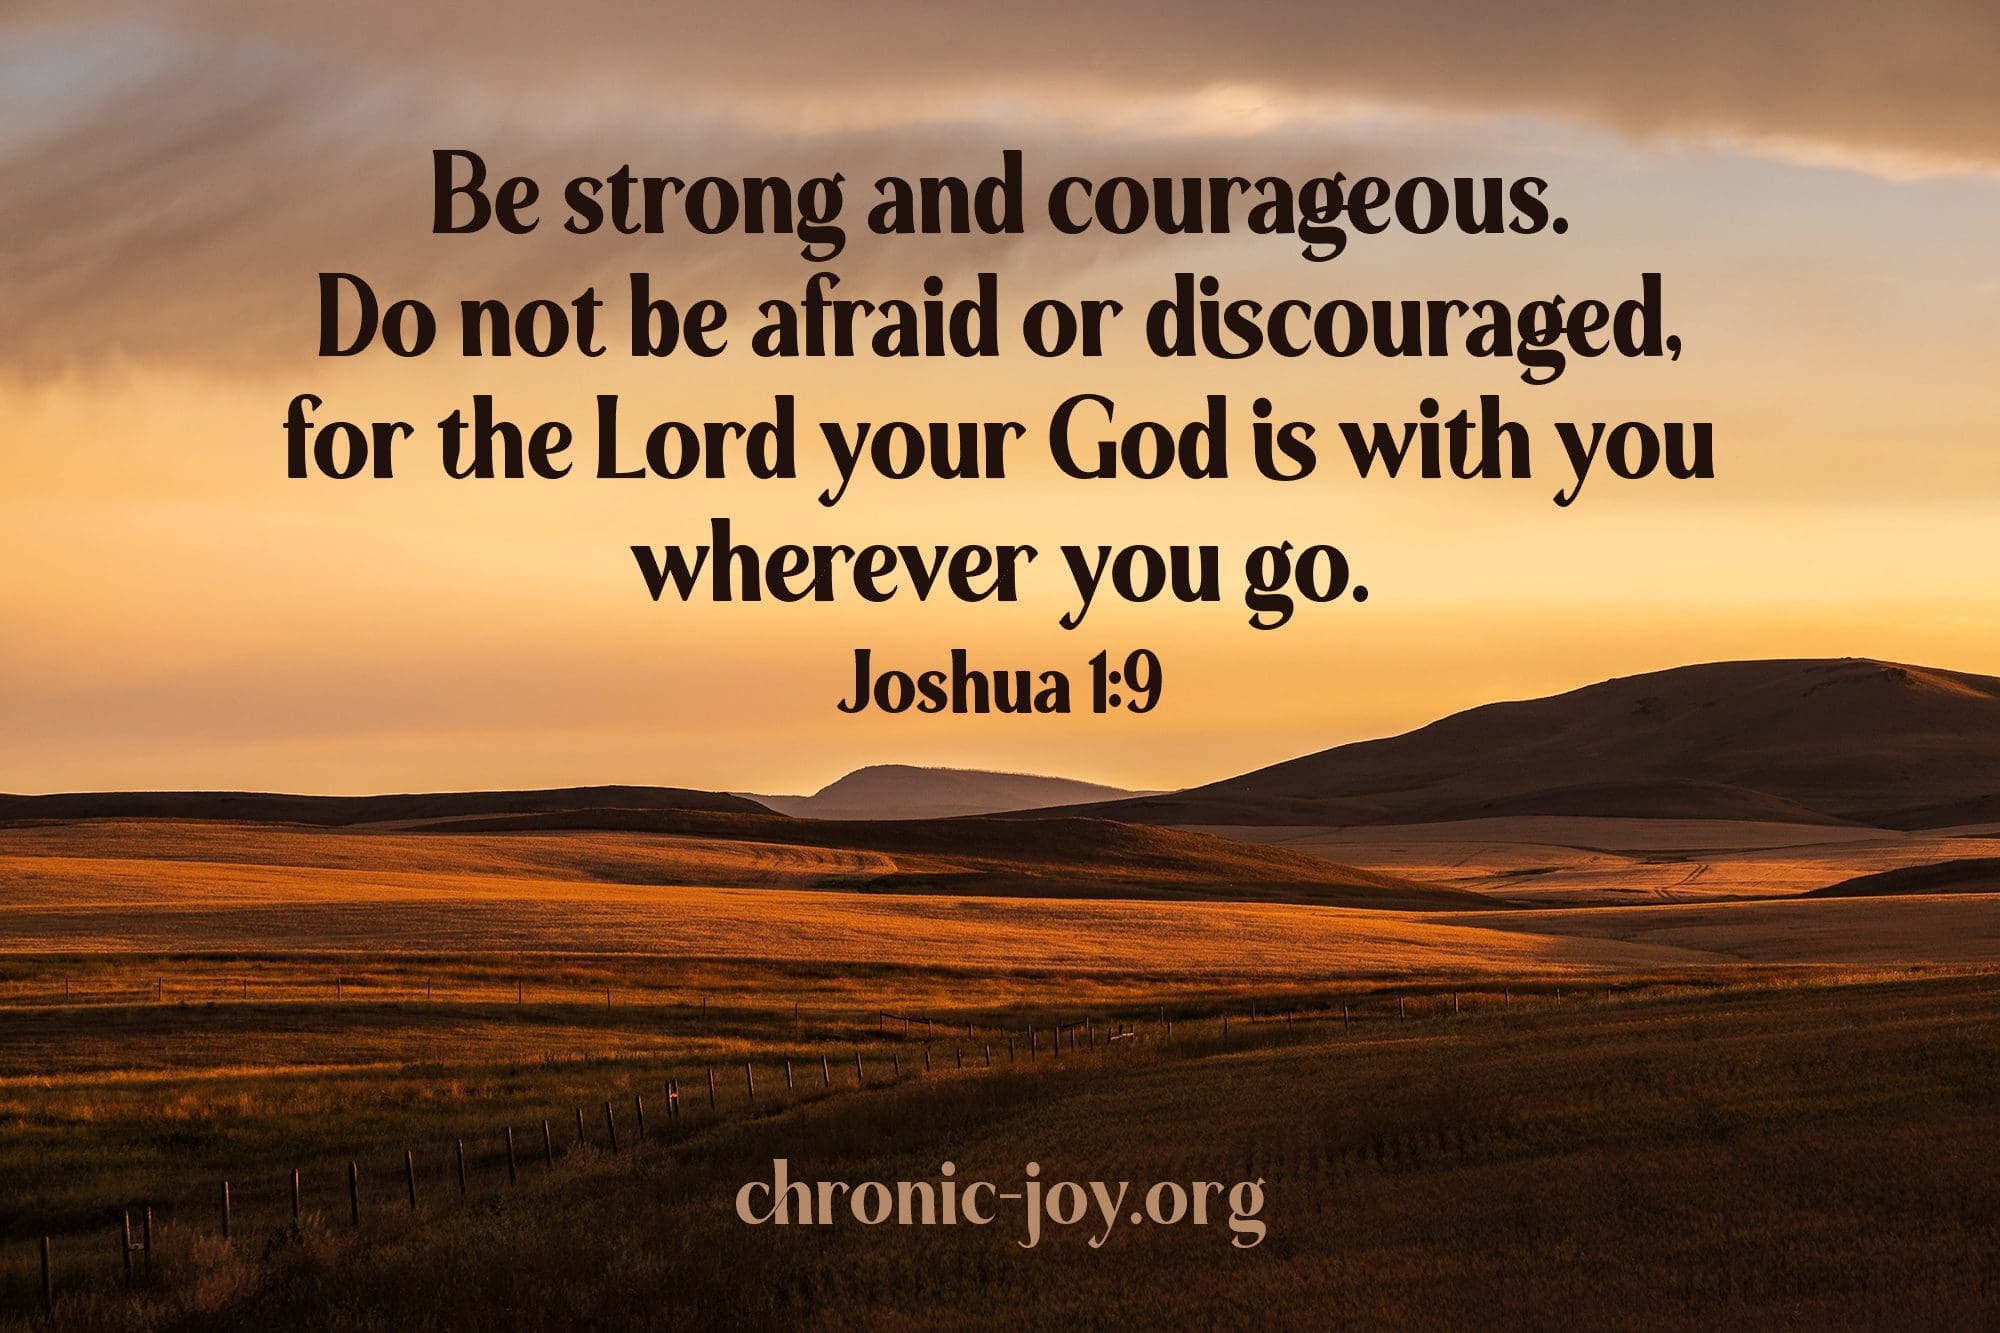 "Be strong and courageous. Do not be afraid or discouraged, for the Lord your God is with you wherever you go." Joshua 1:9 NLT